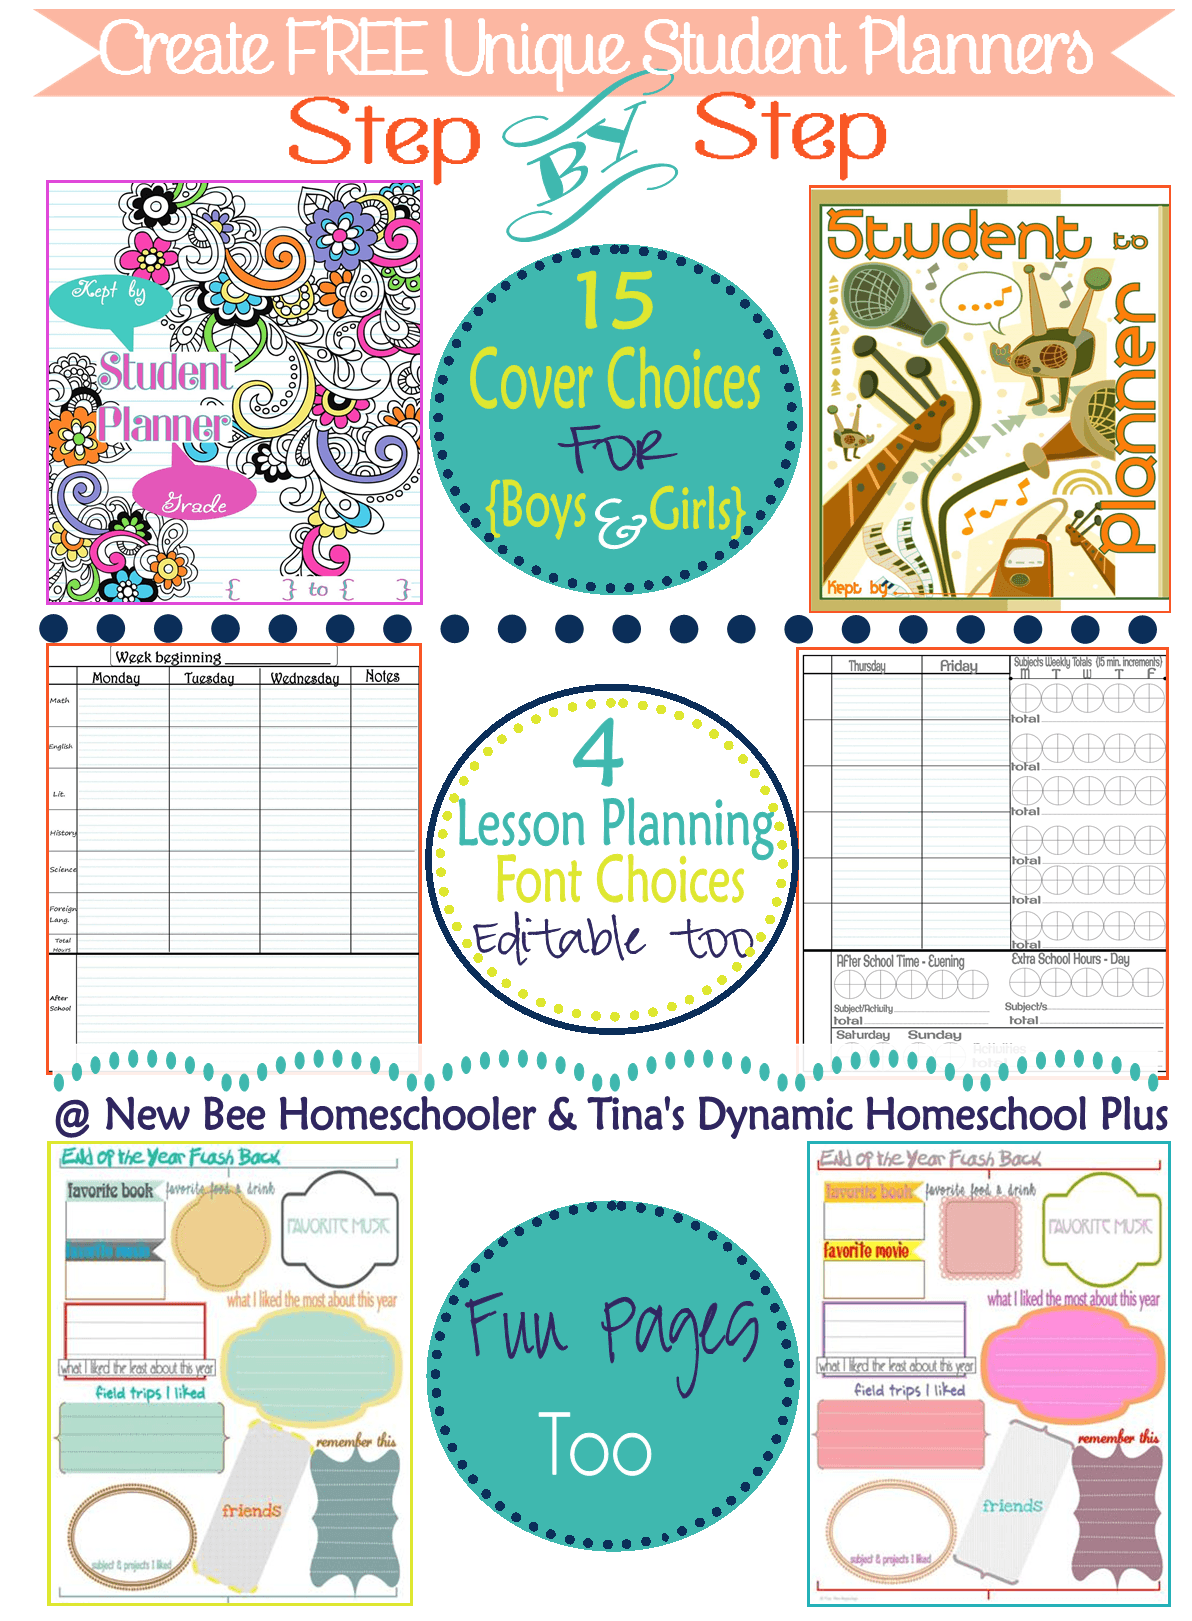 Create Free Unique Student Planners @ Tina's Dynamic Homeschool Plus